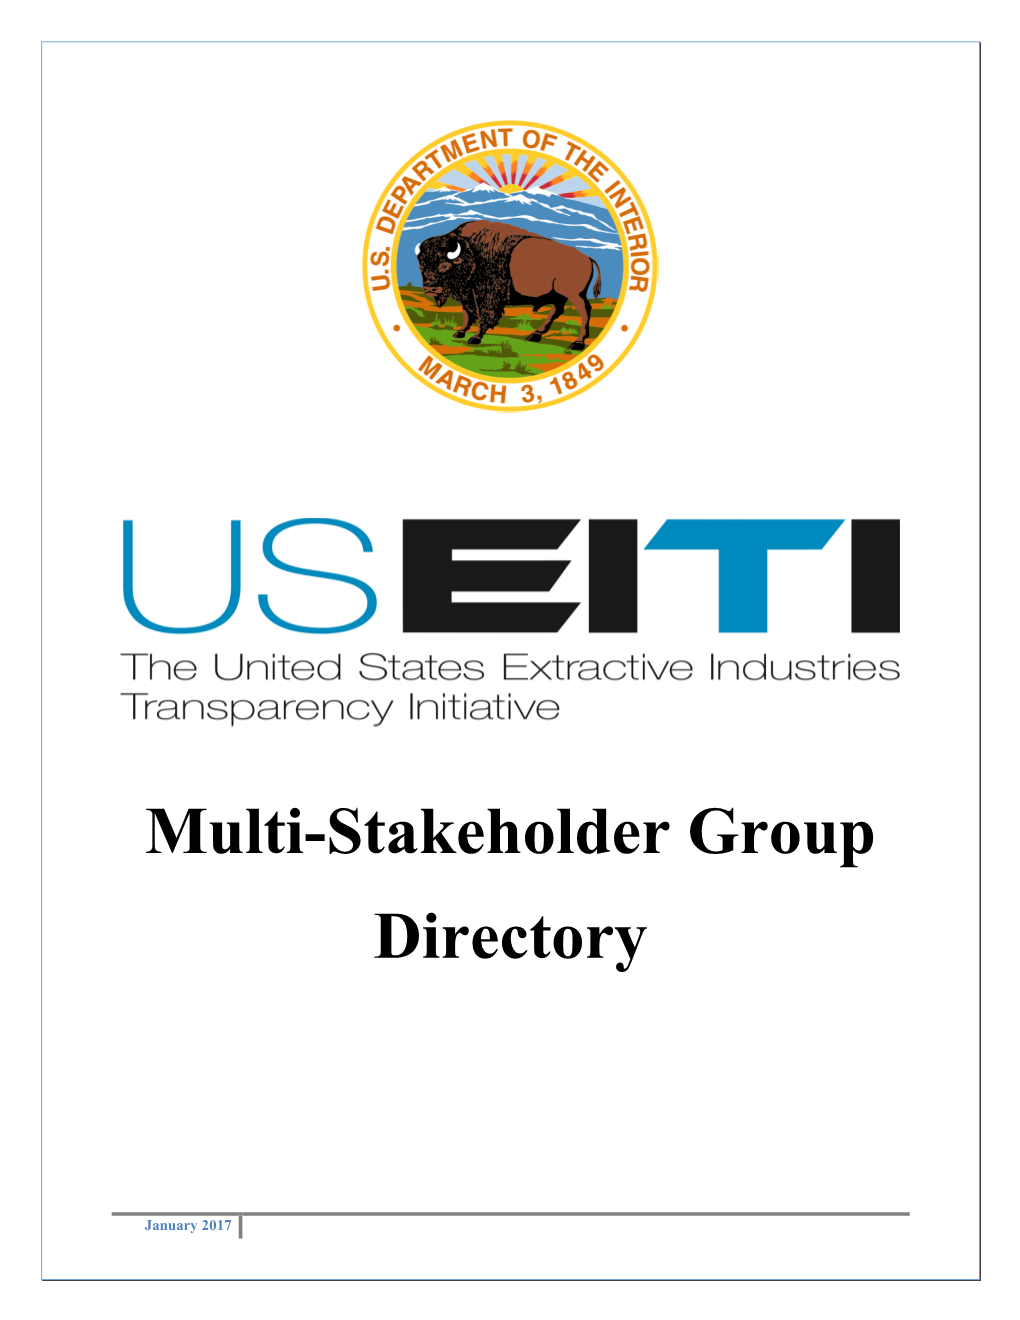 Multi-Stakeholder Group Directory 2